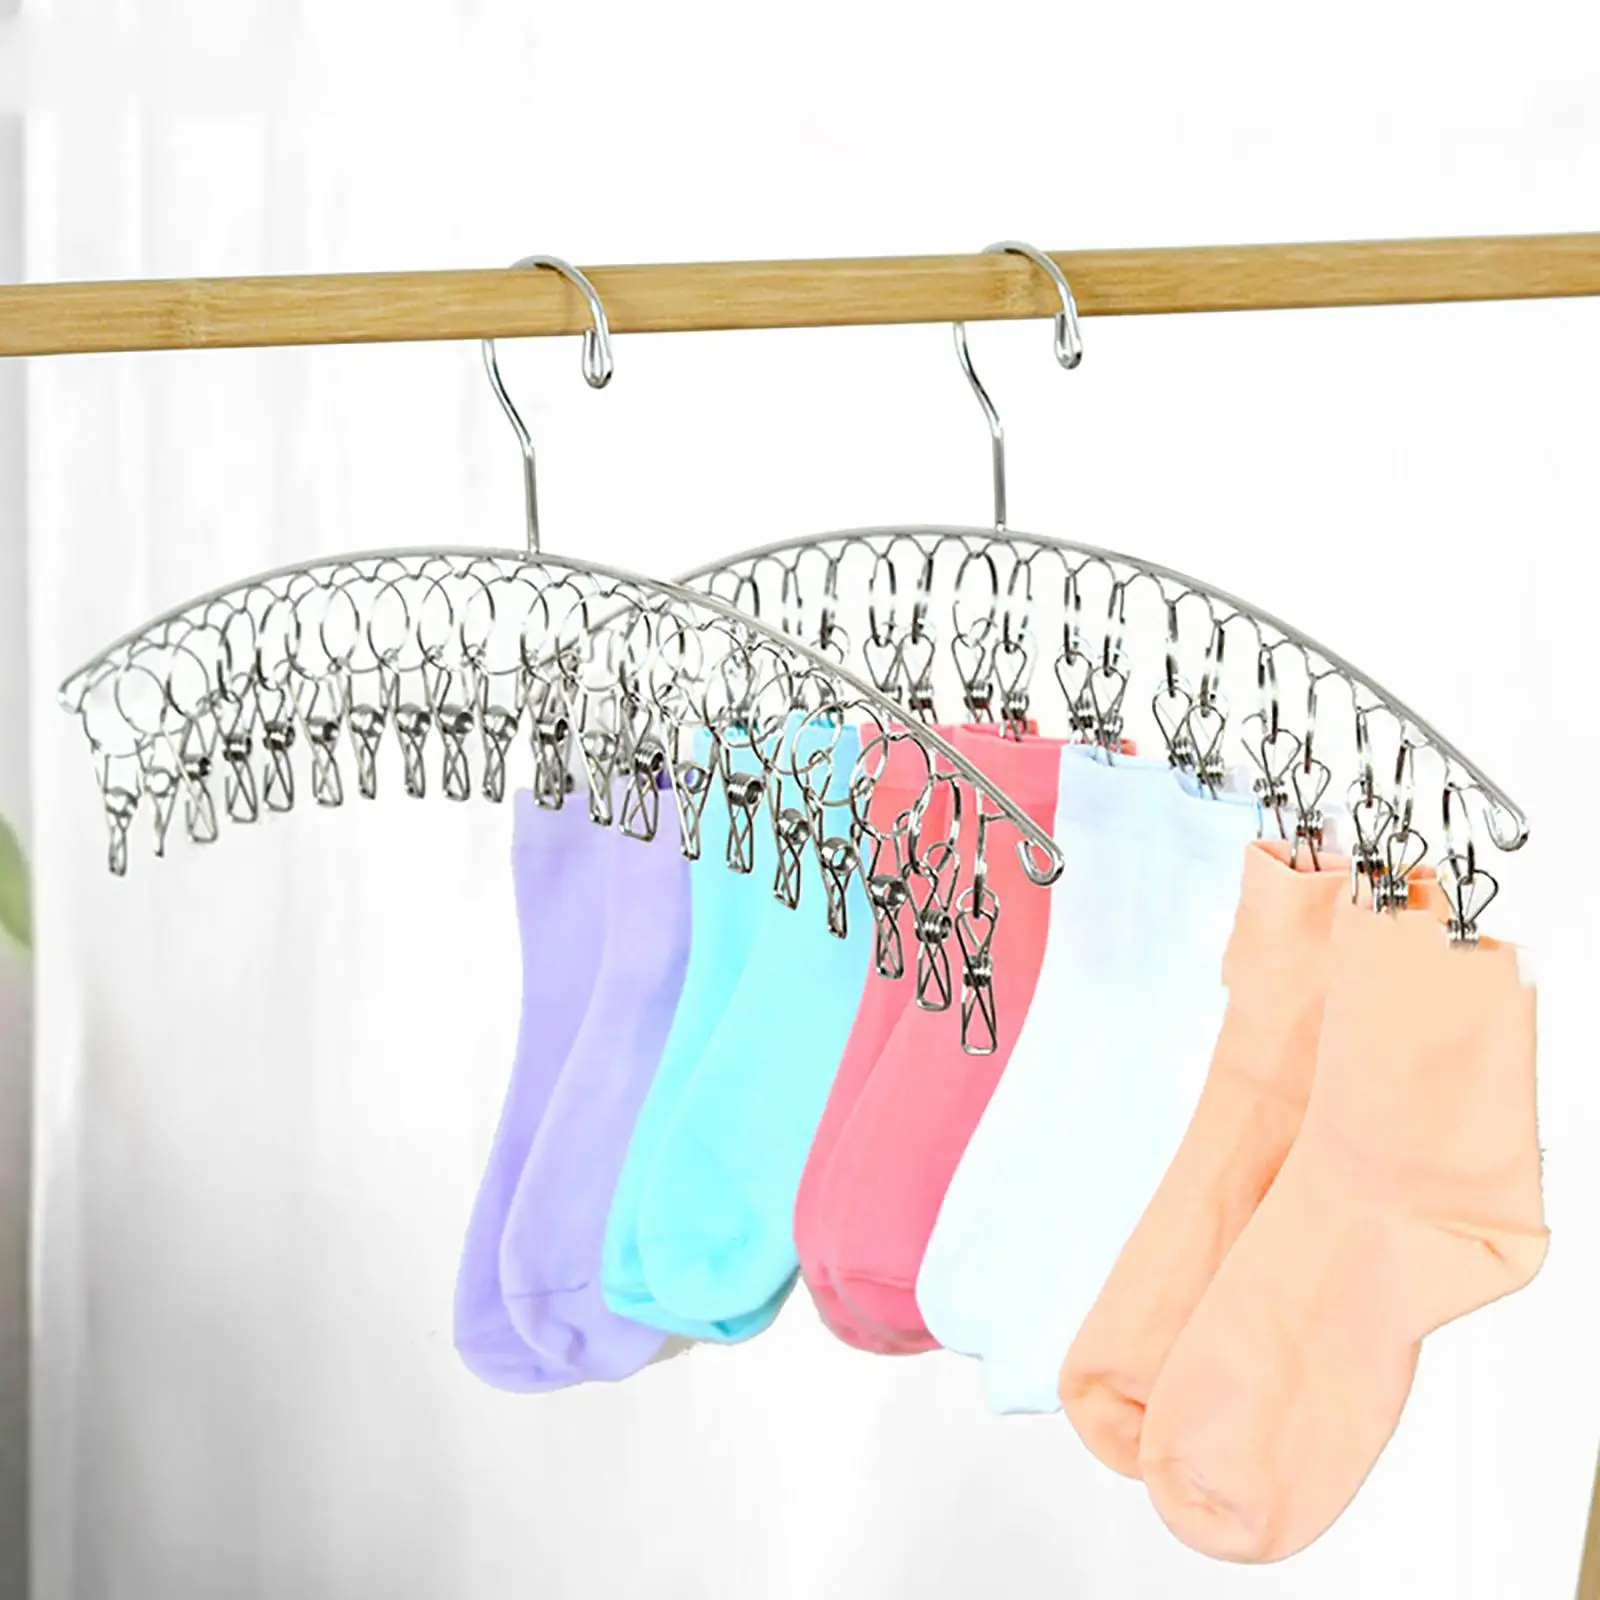 2x Clothes Drying Rack, Laundry Hanger, with 20 Clips Space Saving Multifunctional Handkerchief for Drying Socks Underwear Hats